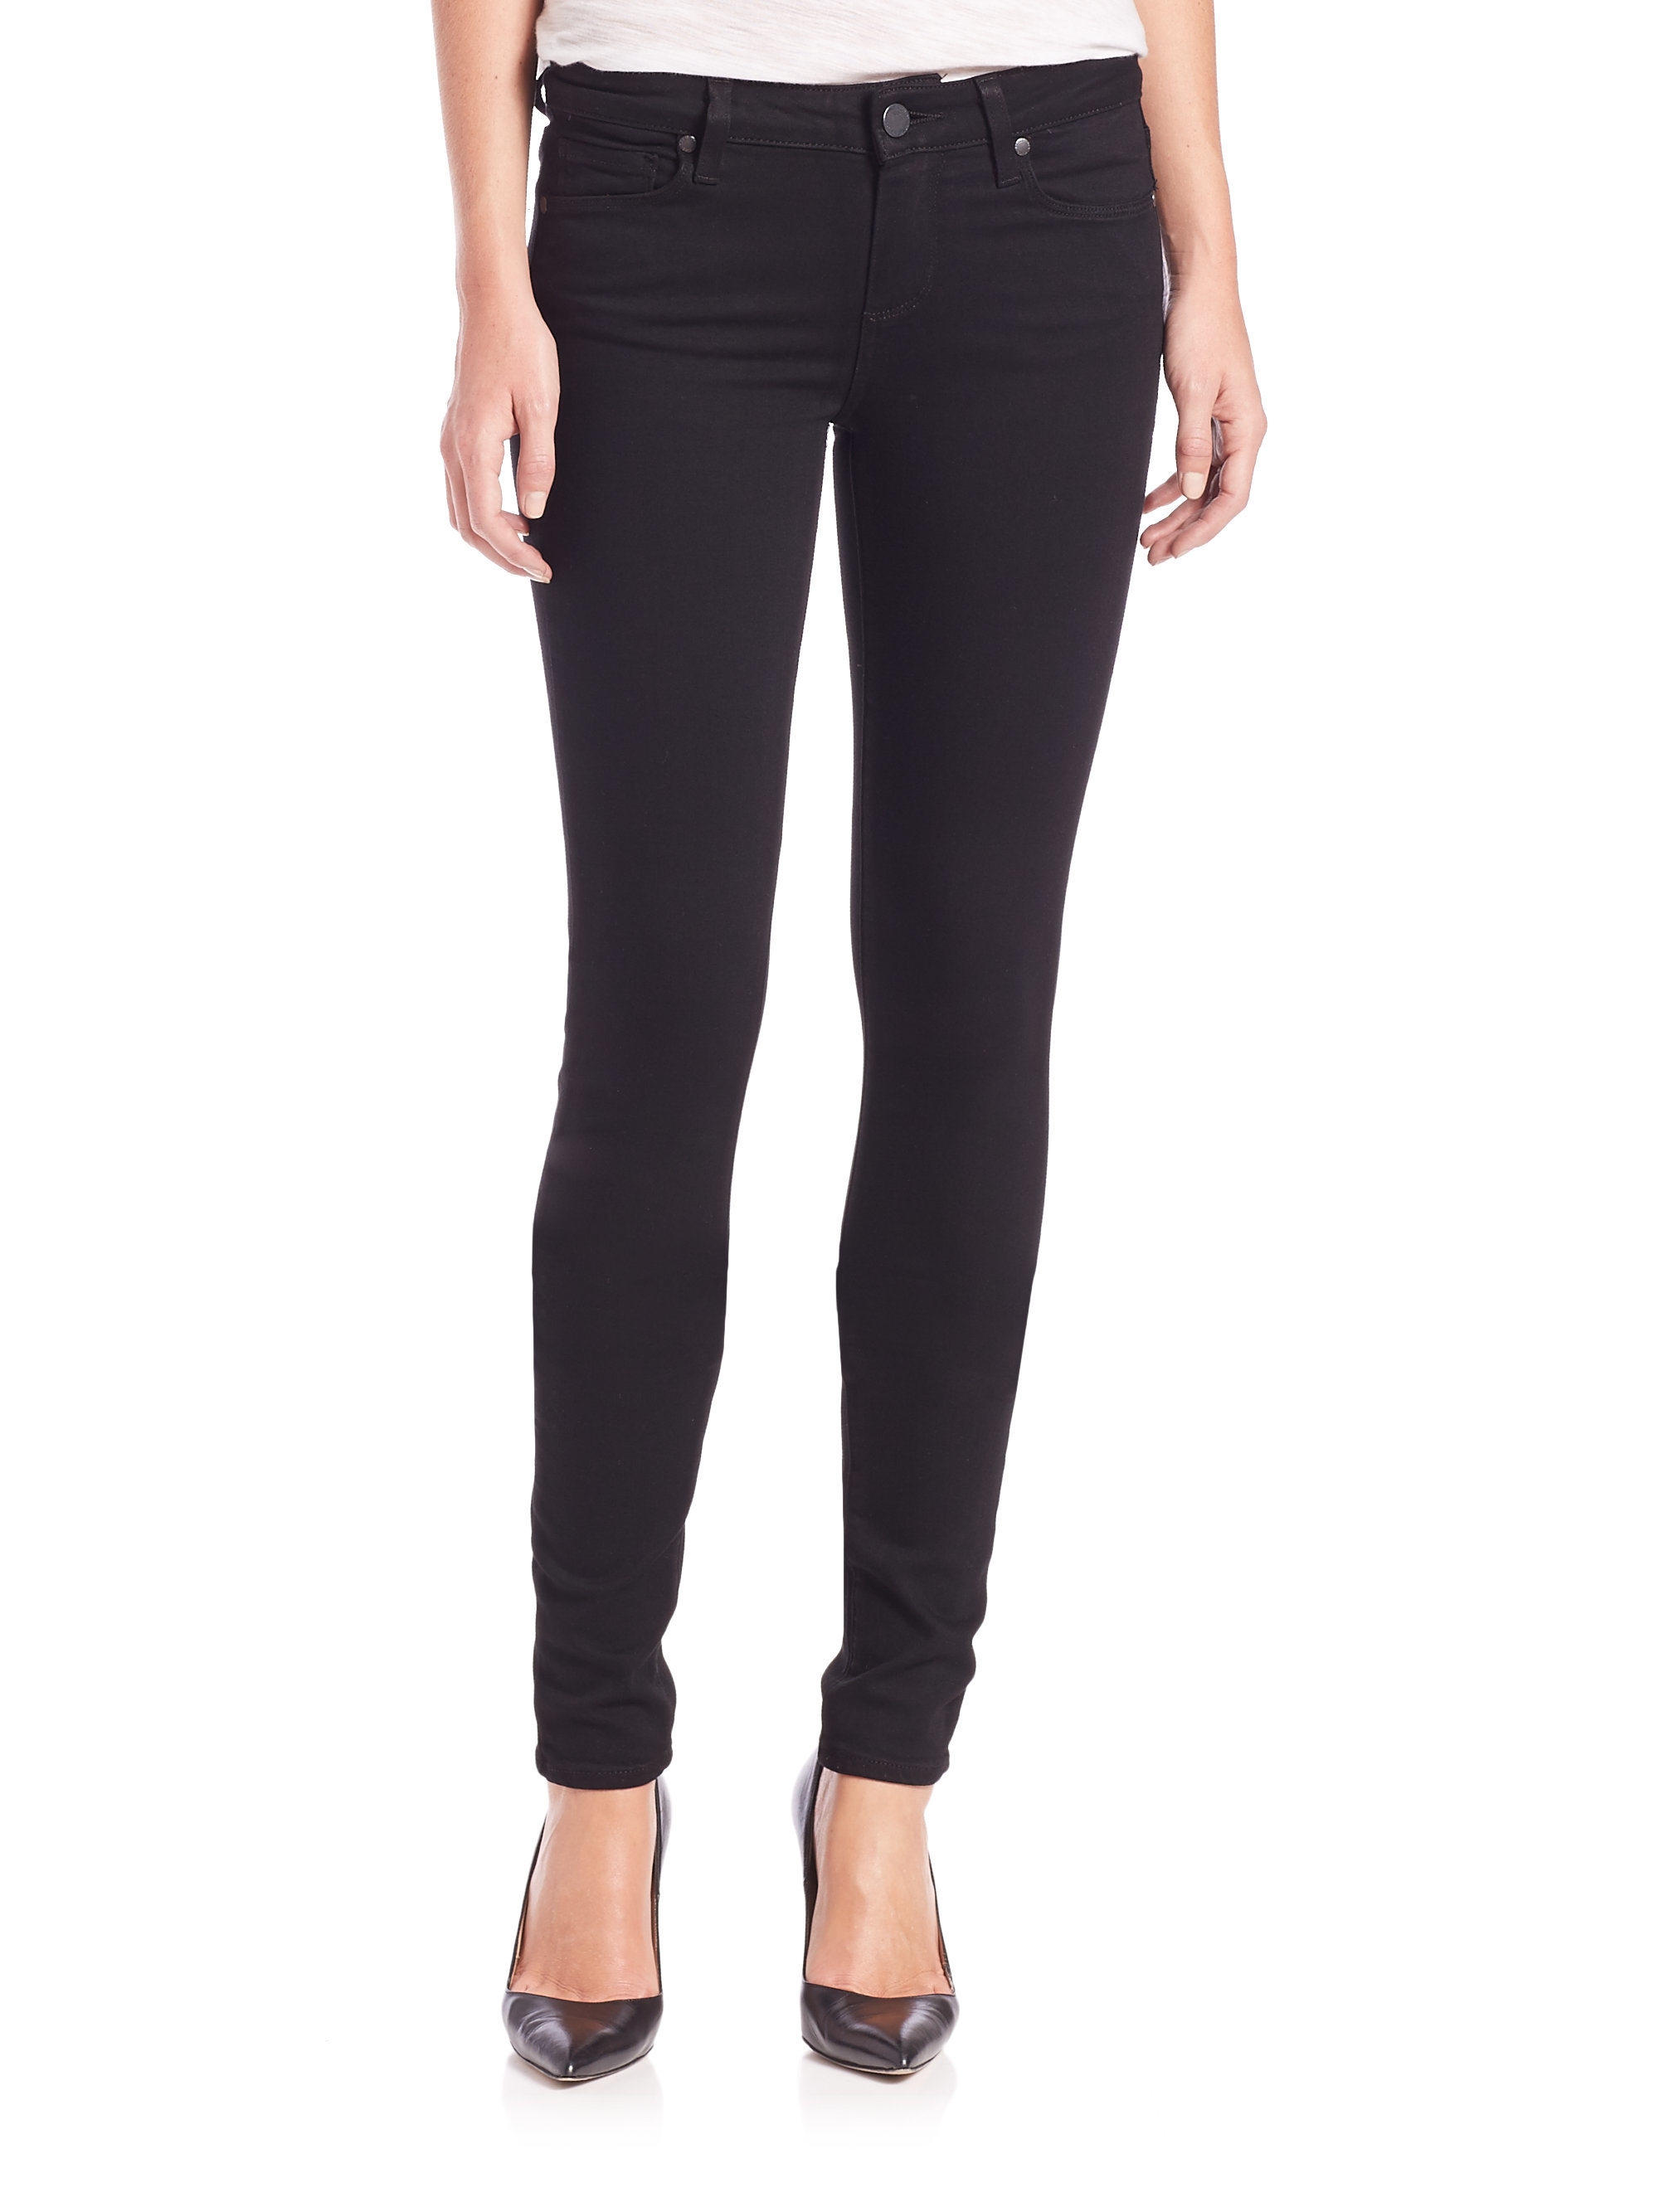 Paige Leggy Extra Long Ultra Skinny Jeans in Black | Lyst